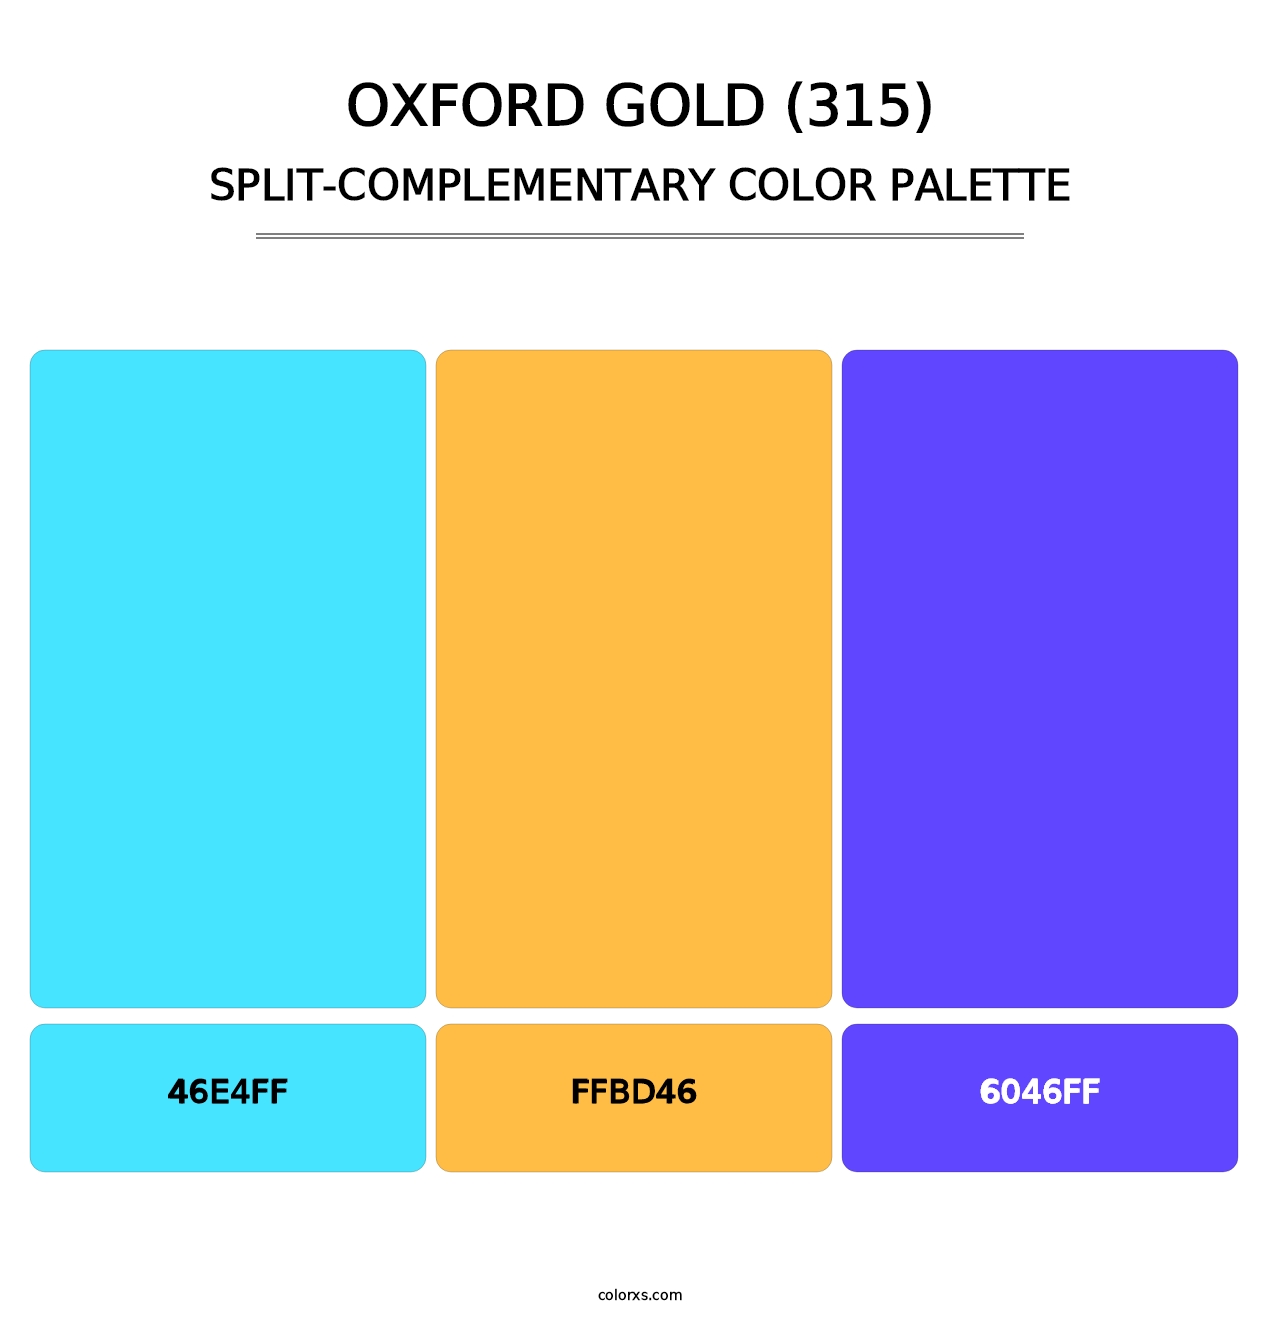 Oxford Gold (315) - Split-Complementary Color Palette